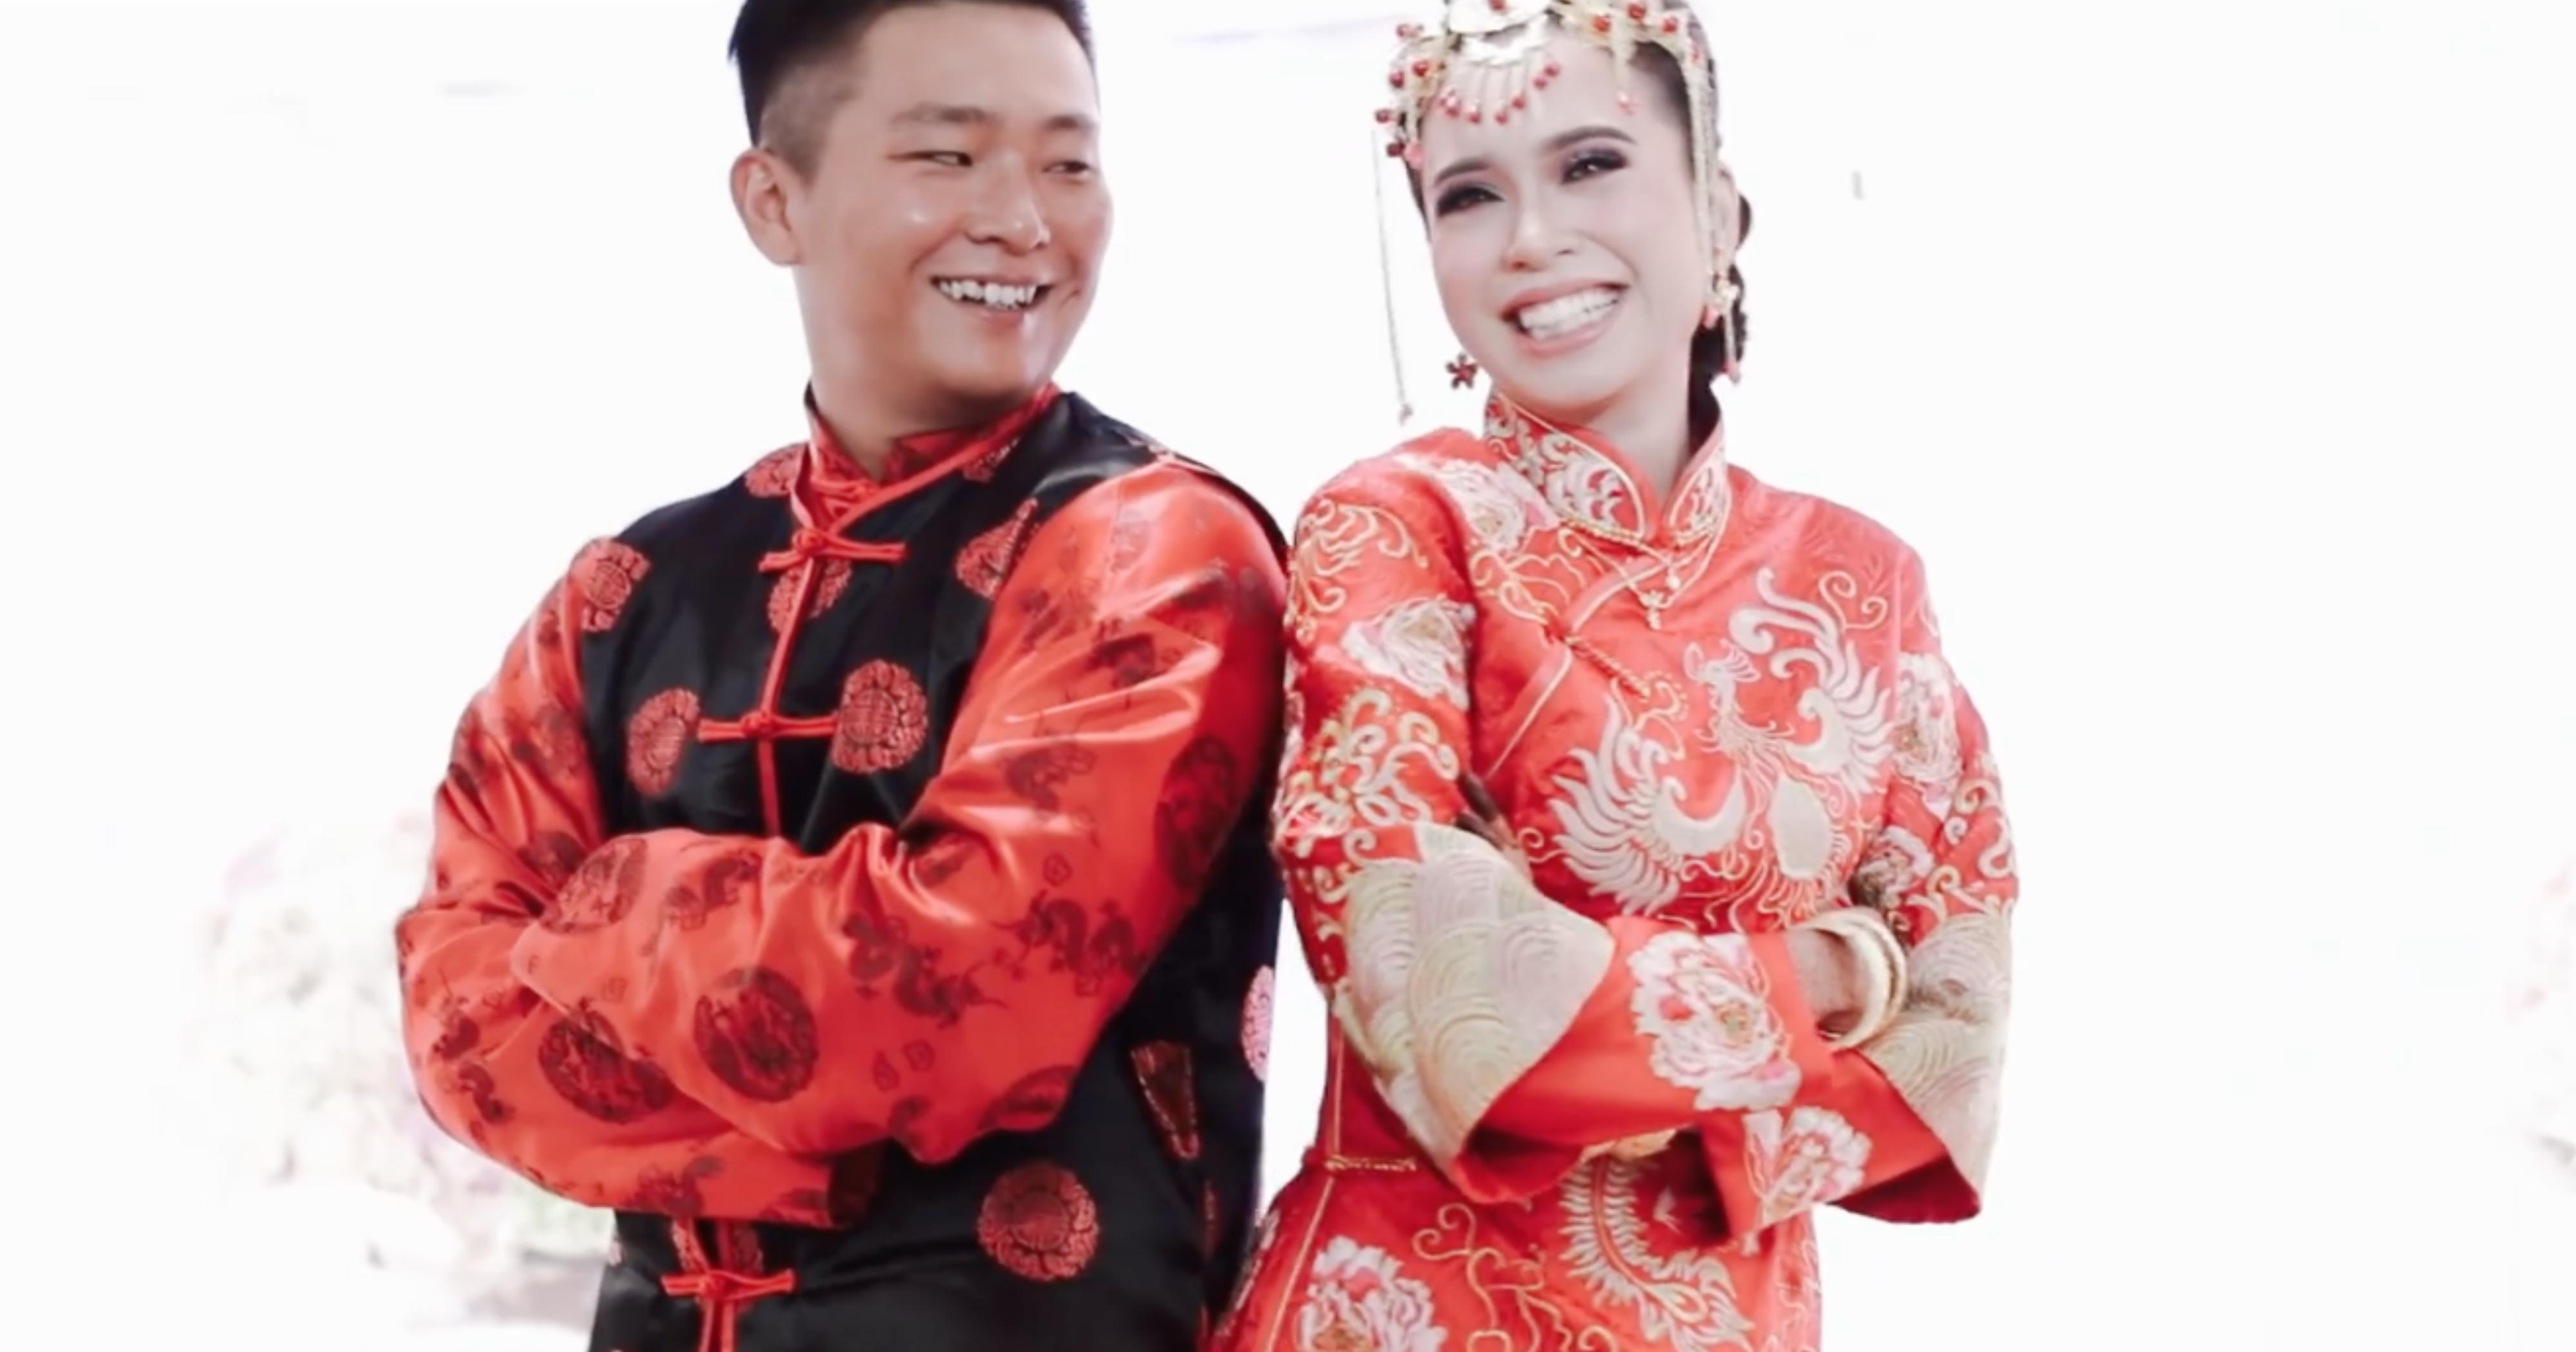 Video Of Malay Bride And Chinese Groom Wedding In S Pore Will Warm The